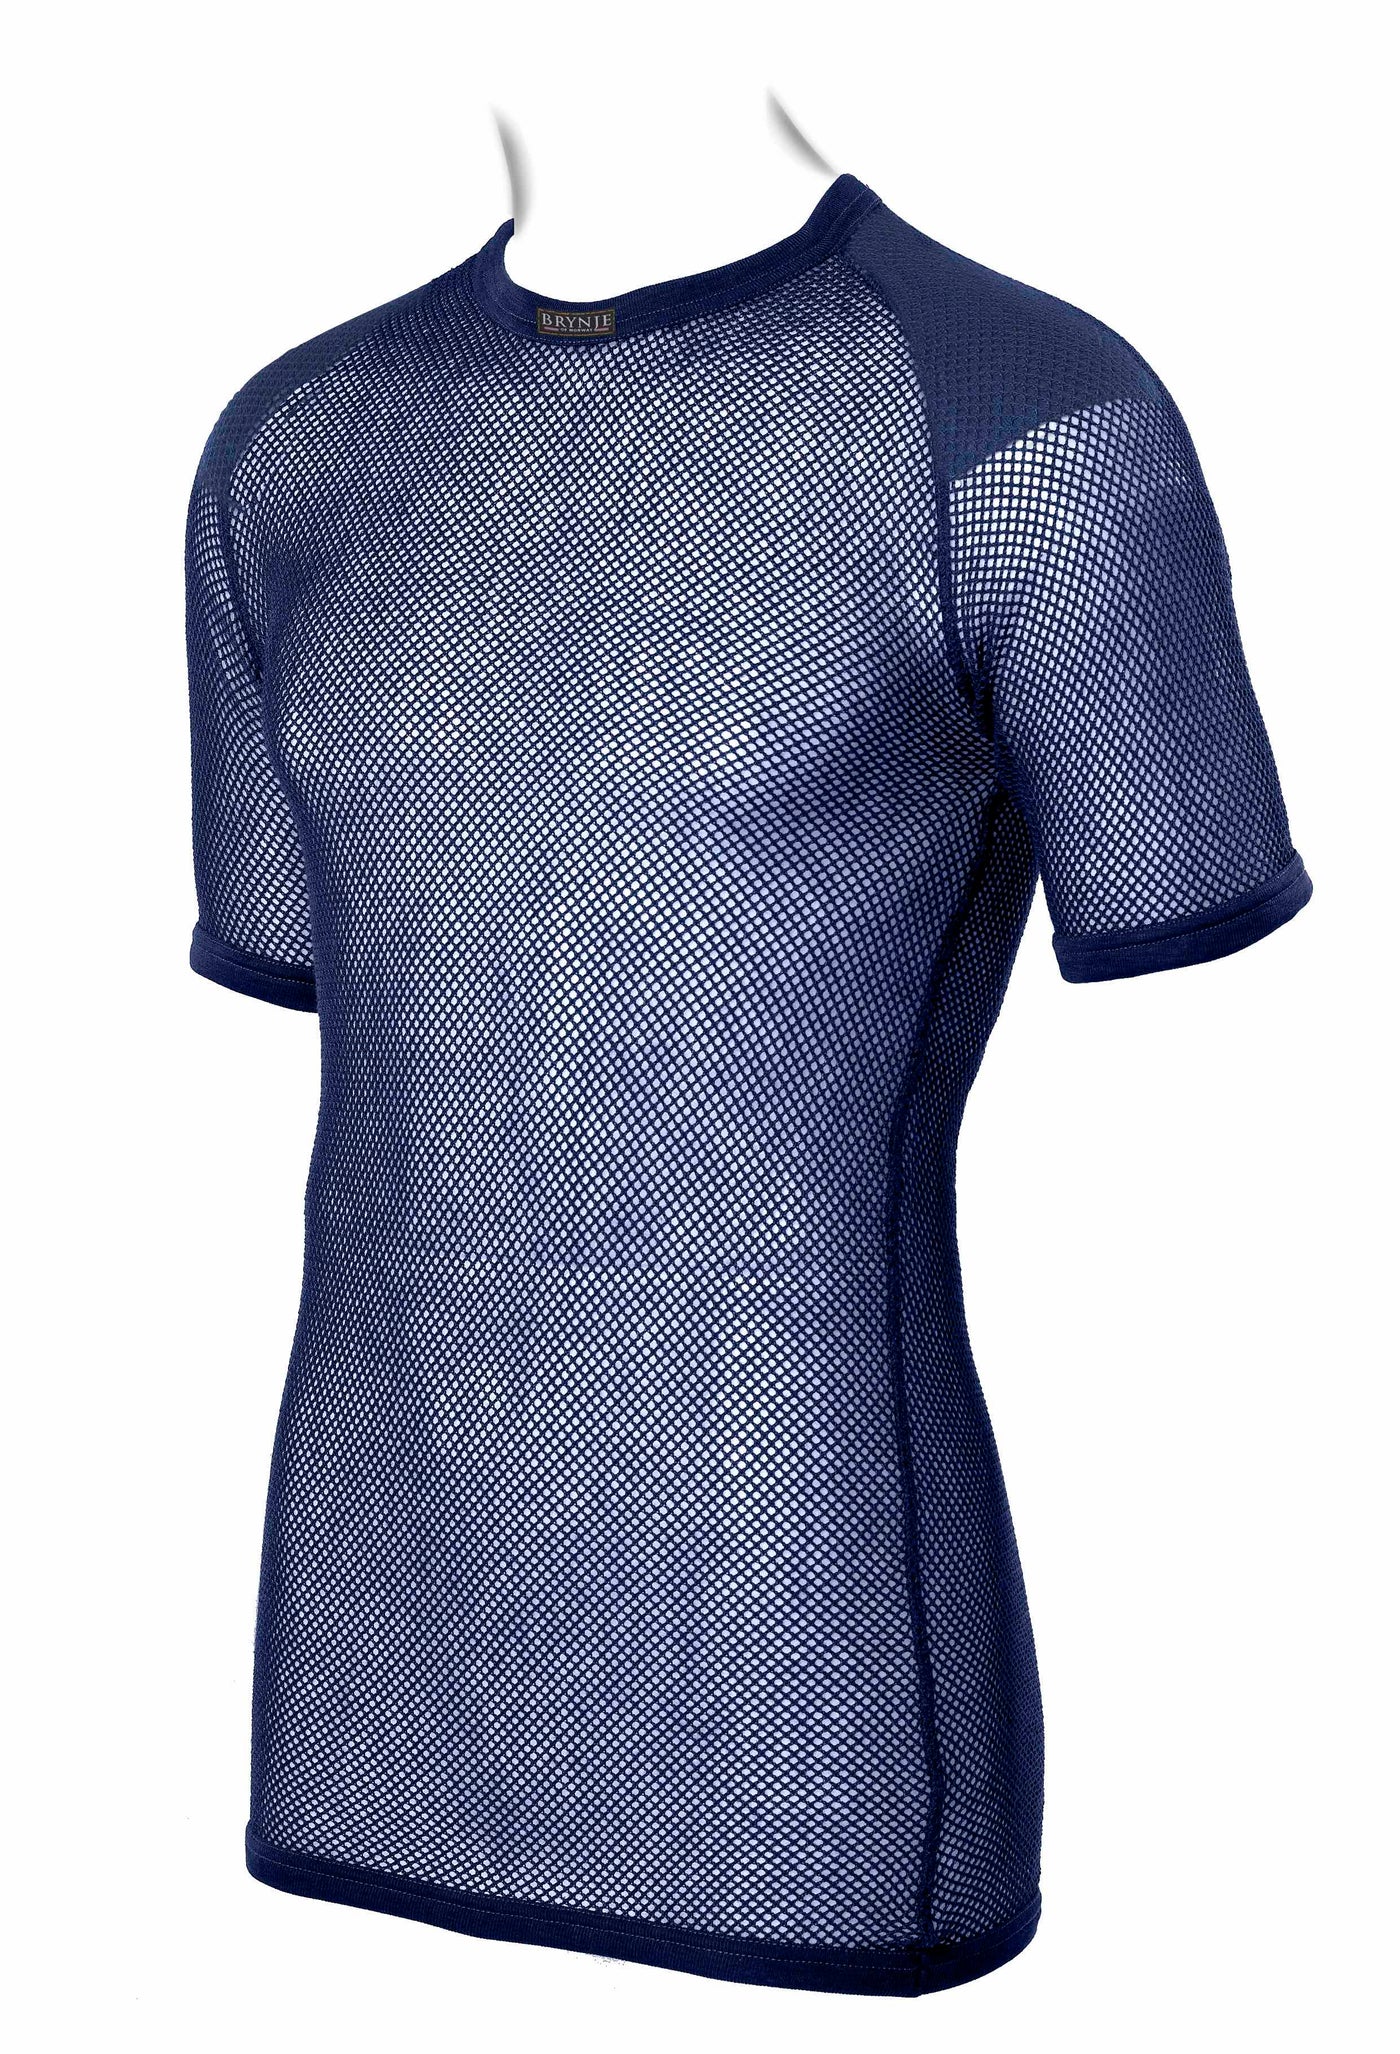 Brynje Super Thermo T-shirt With Inlay